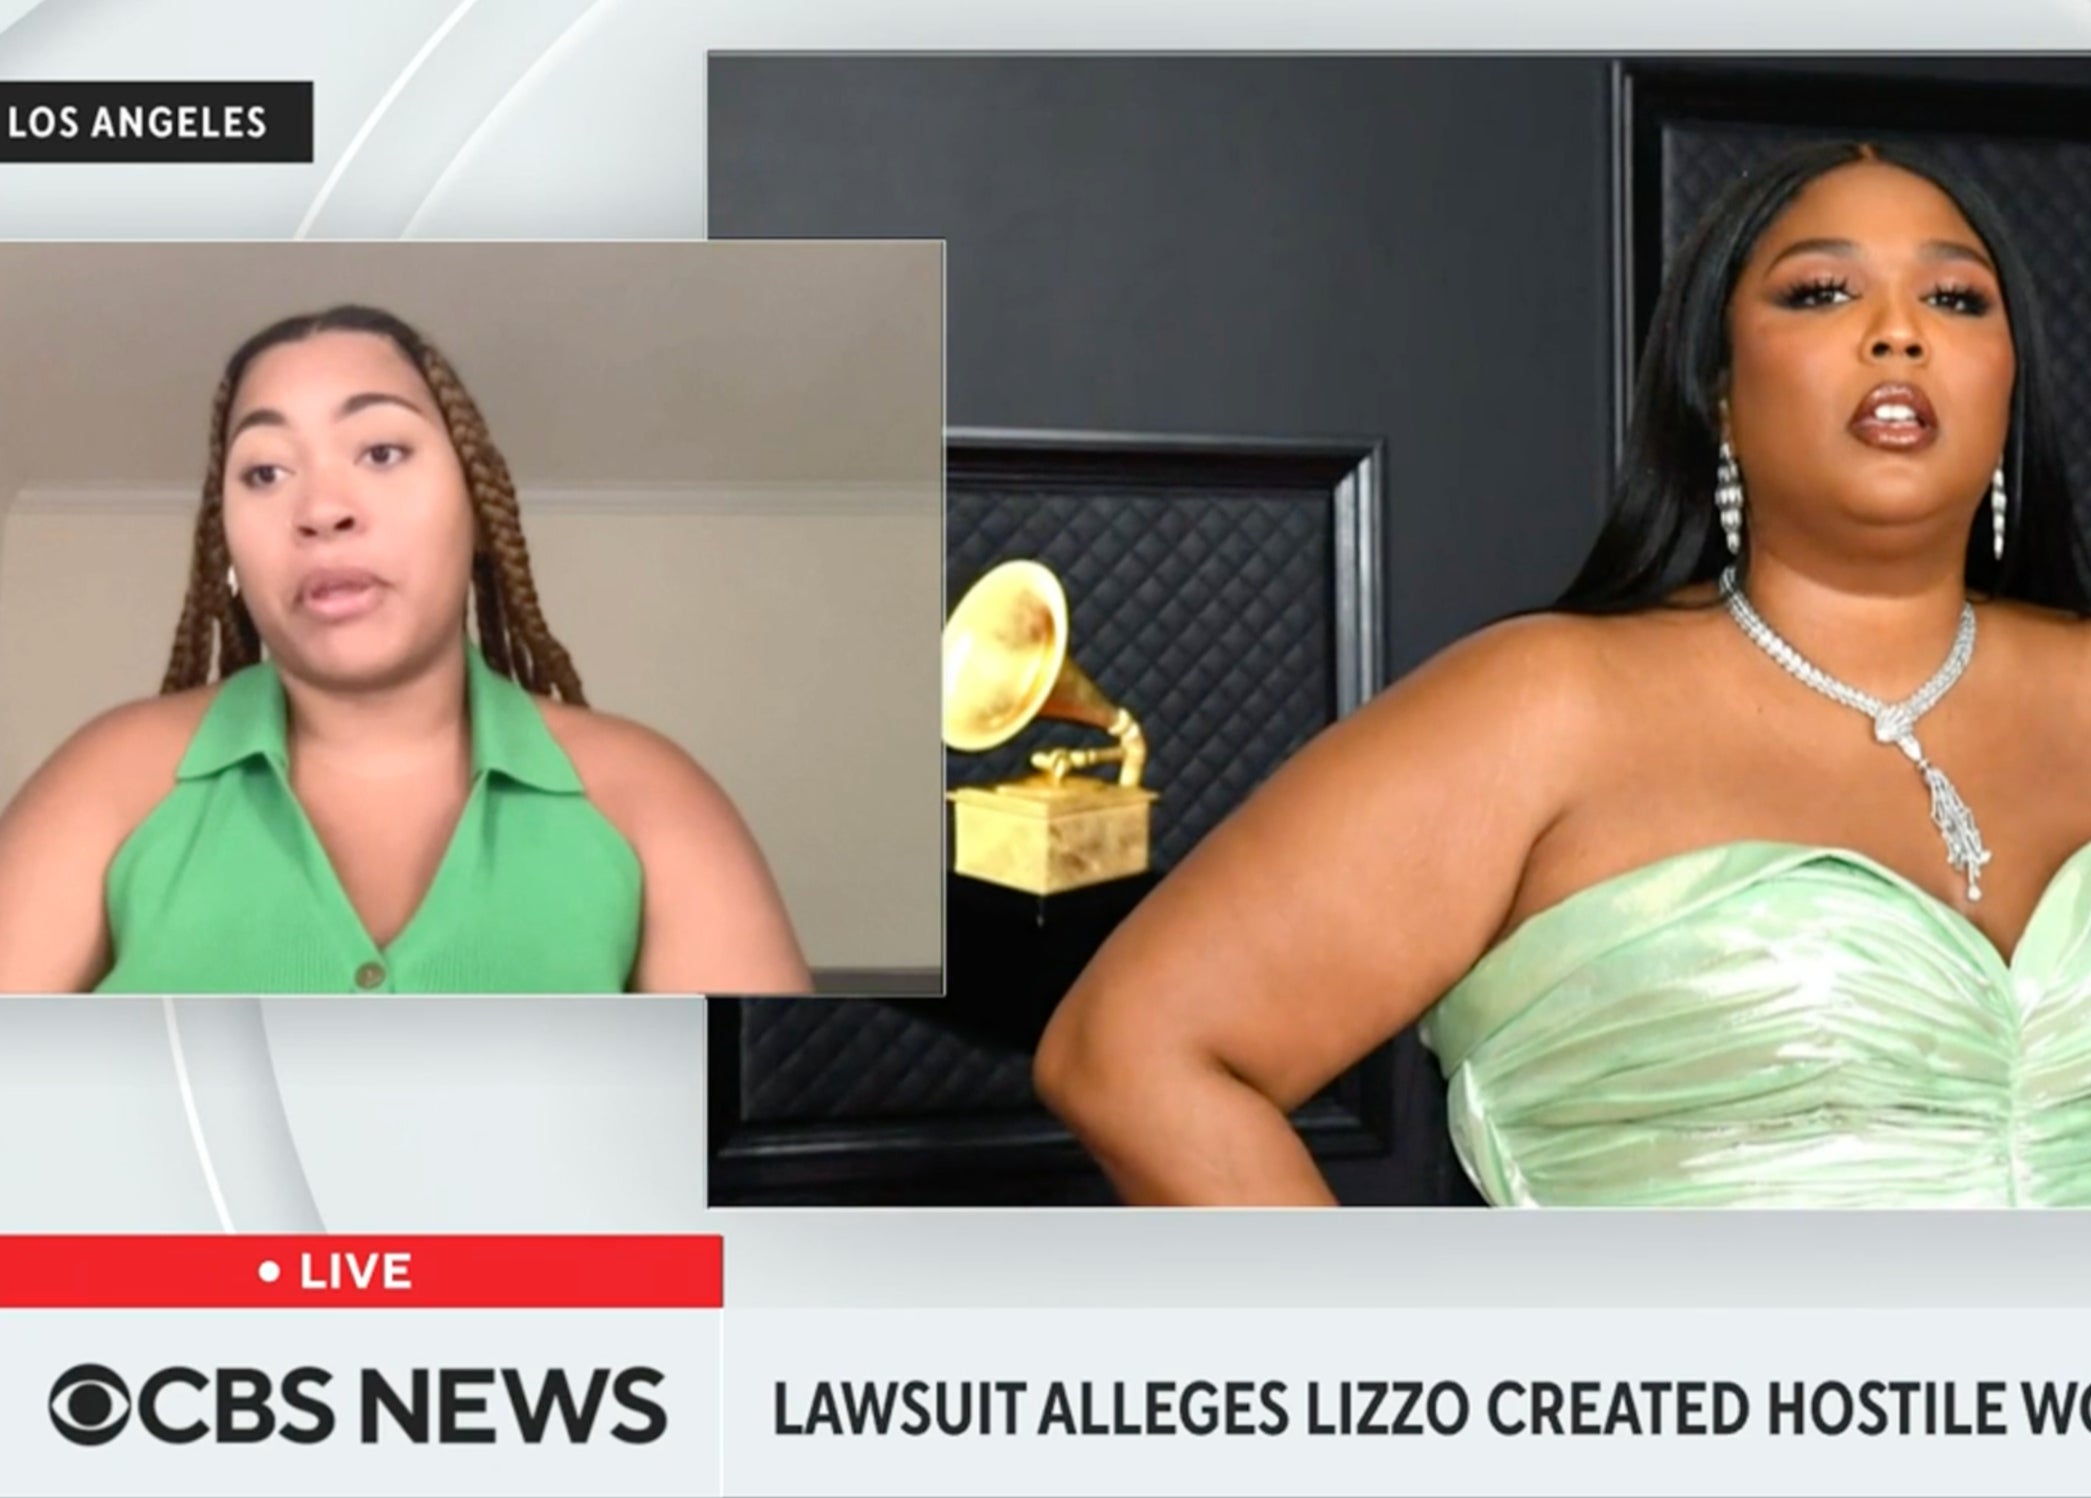 LIZZO NEWS AS A BRAND!! #lizzo #lizzoallegation #lizzoallegations